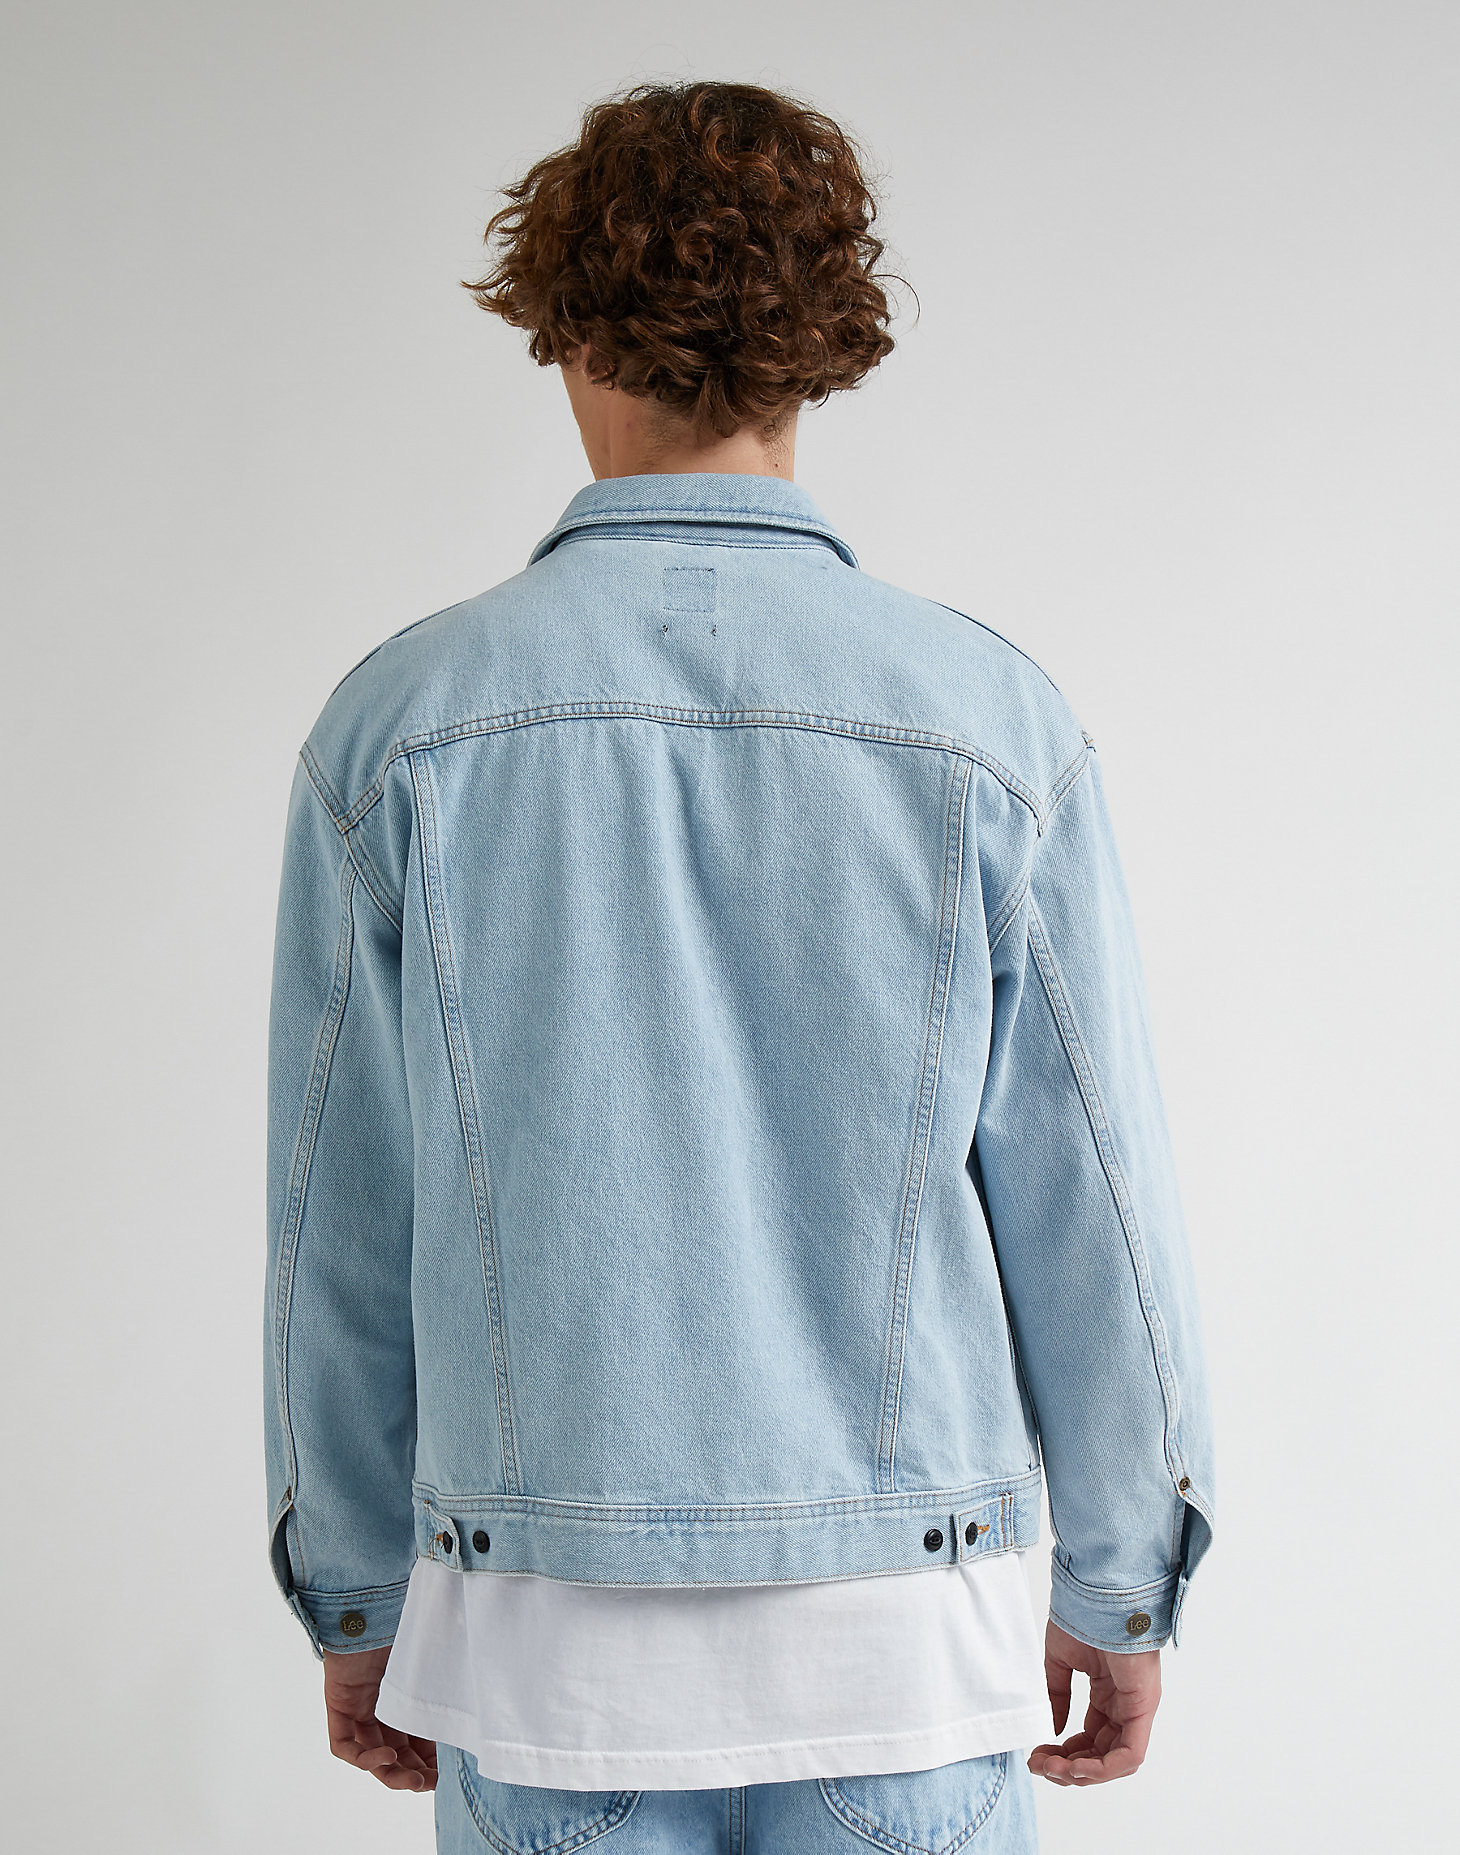 Relaxed Rider Jacket in Light Blue Monday alternative view 1